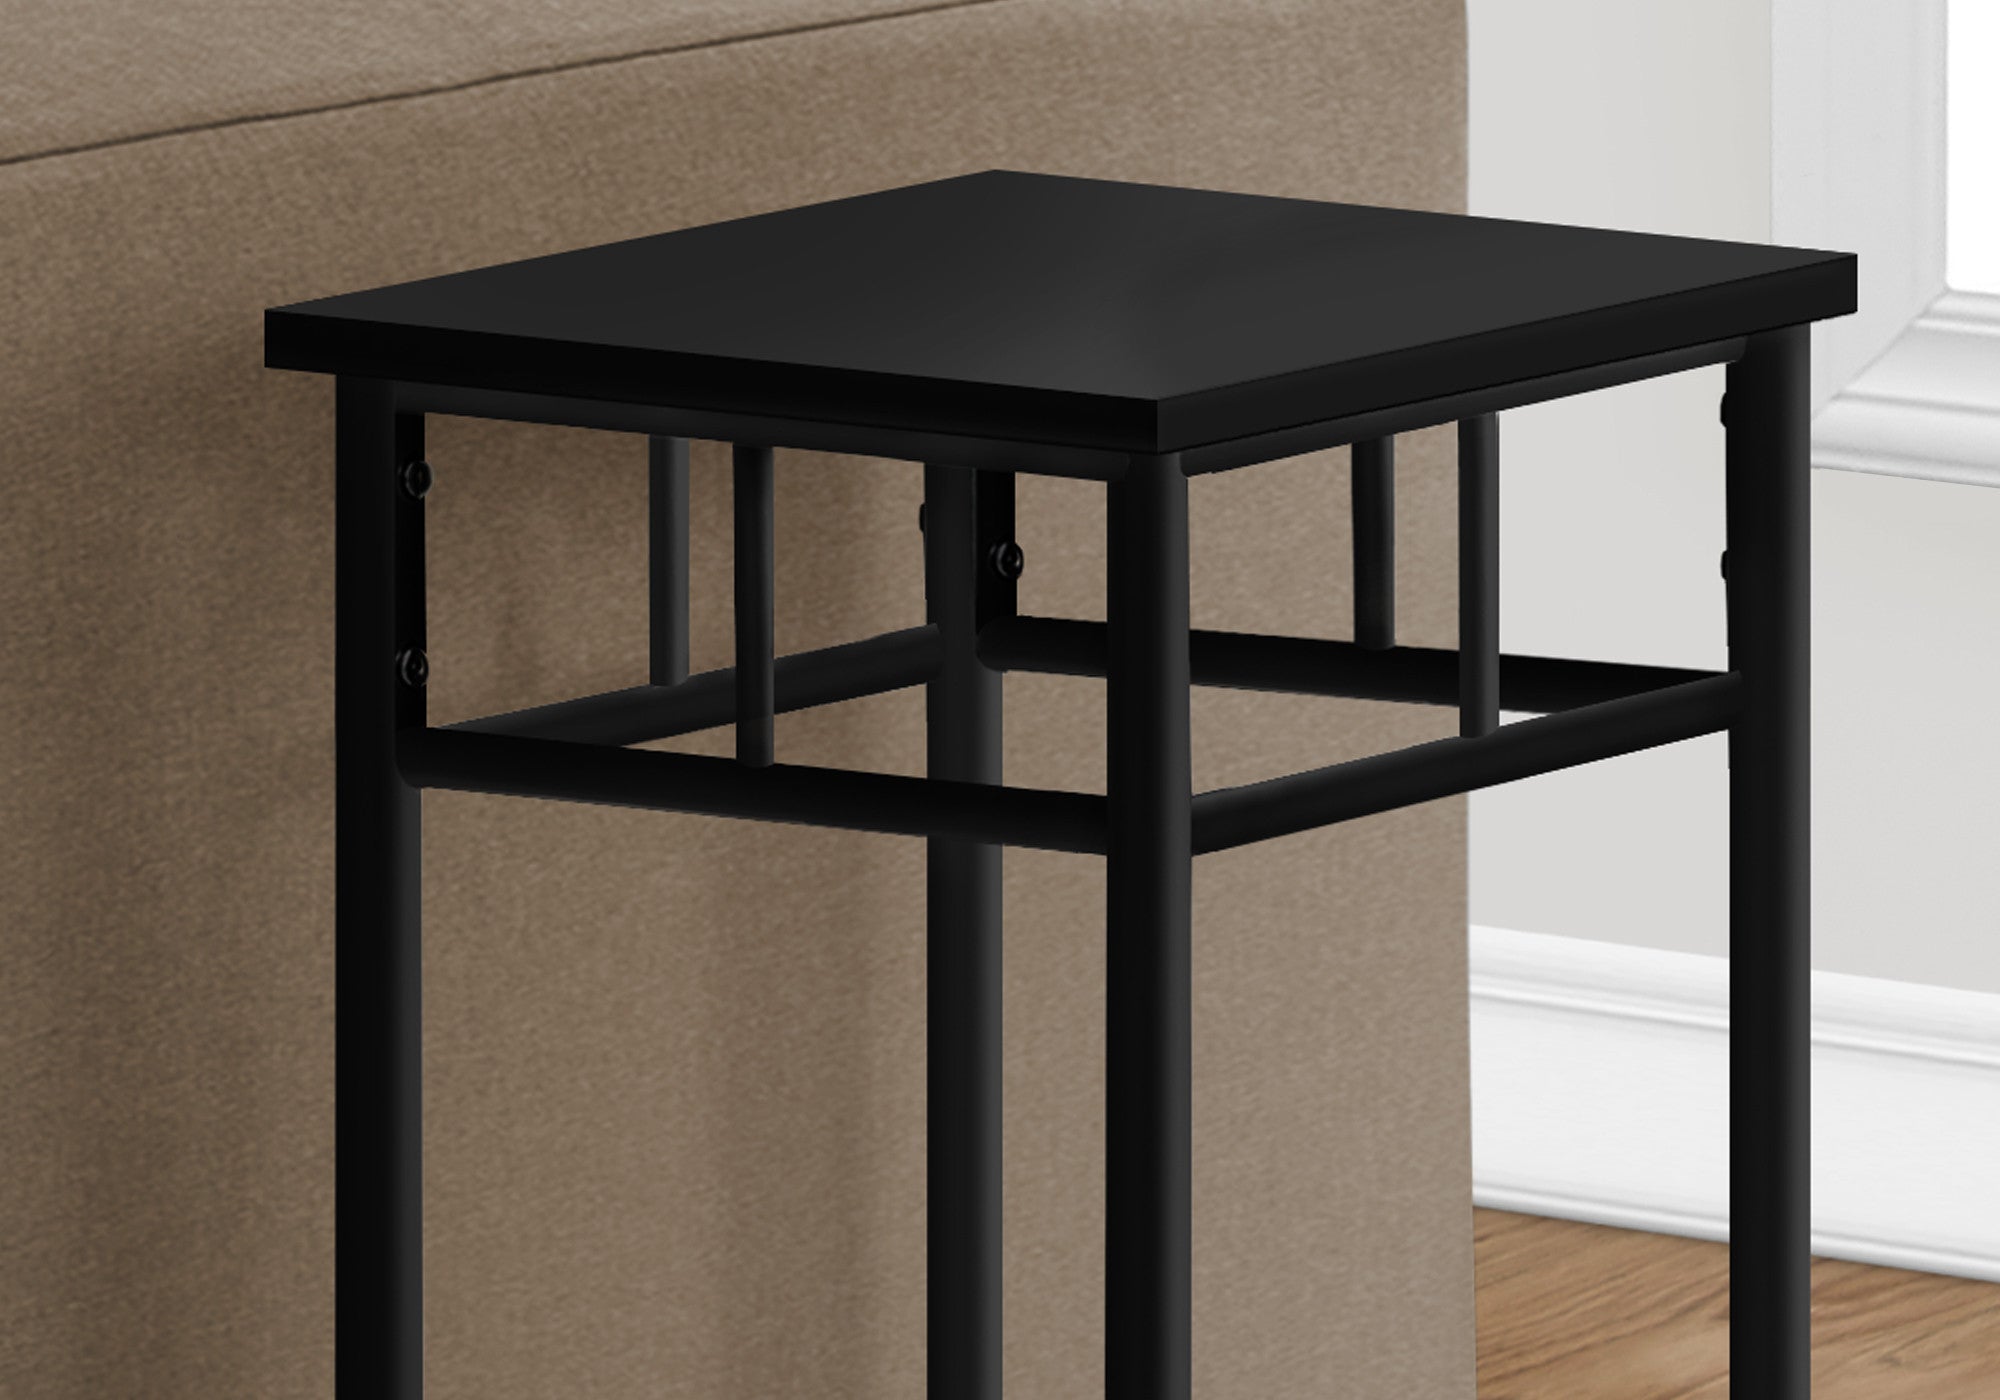 28" Black End Table With Shelf